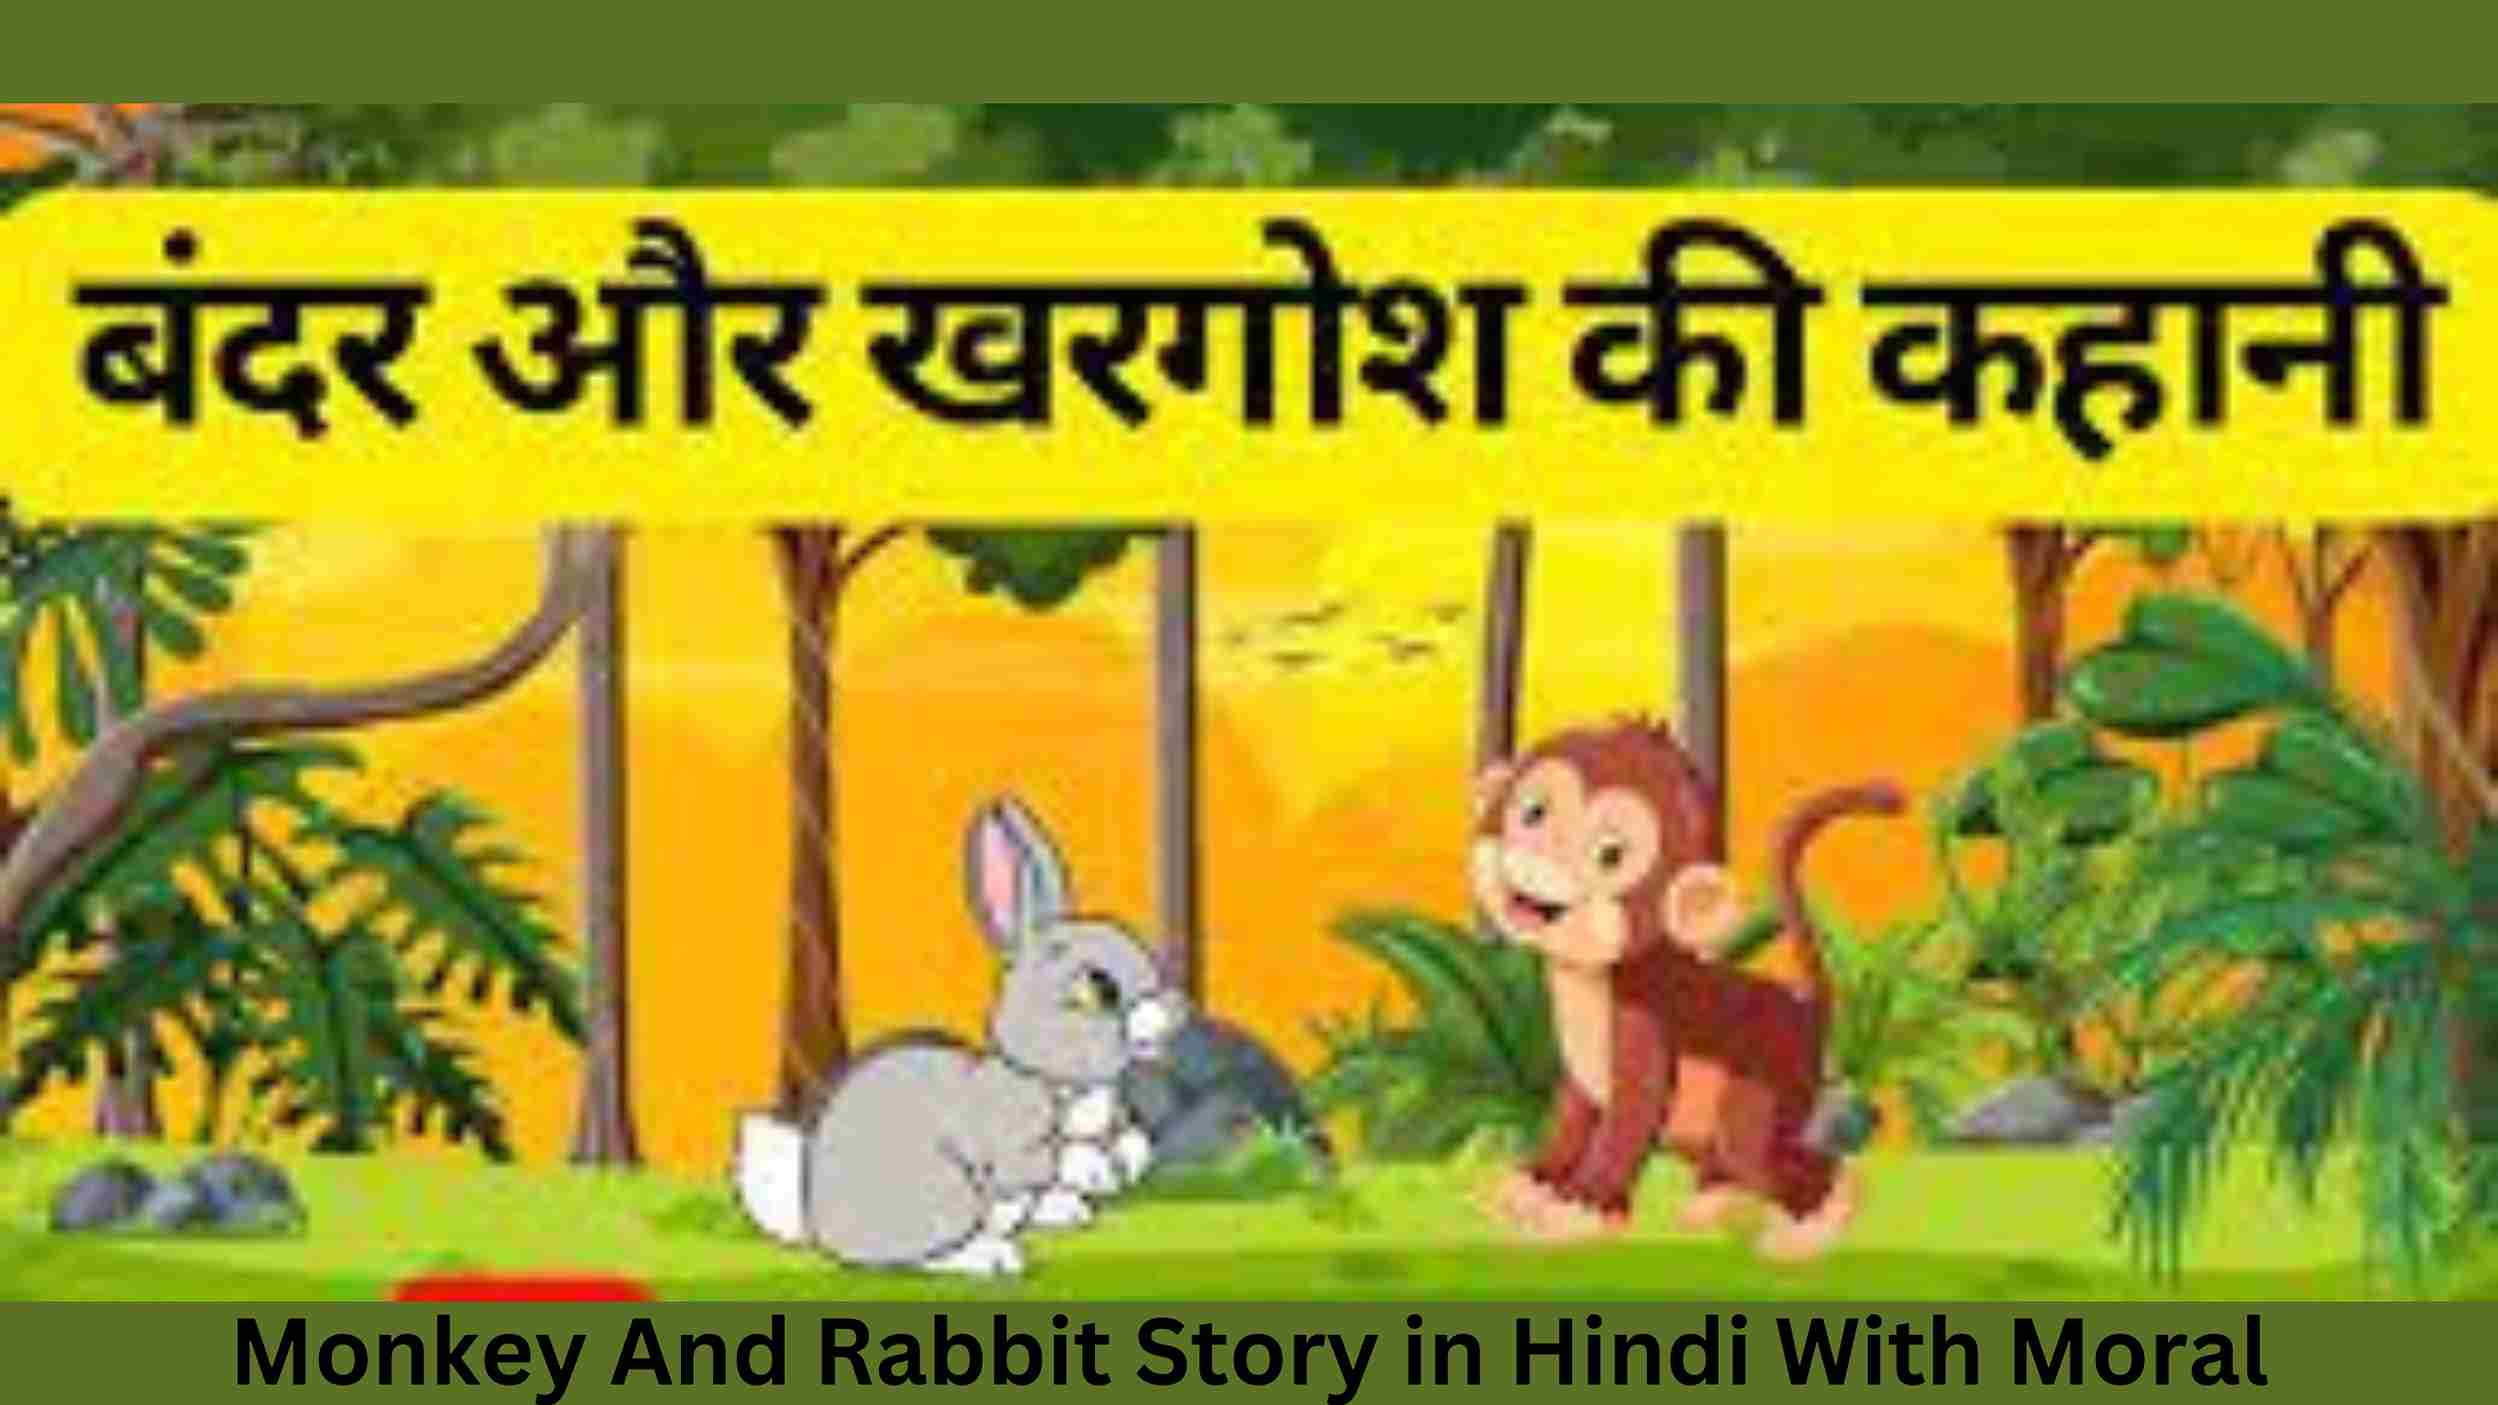 Monkey And Rabbit Story in Hindi With Moral